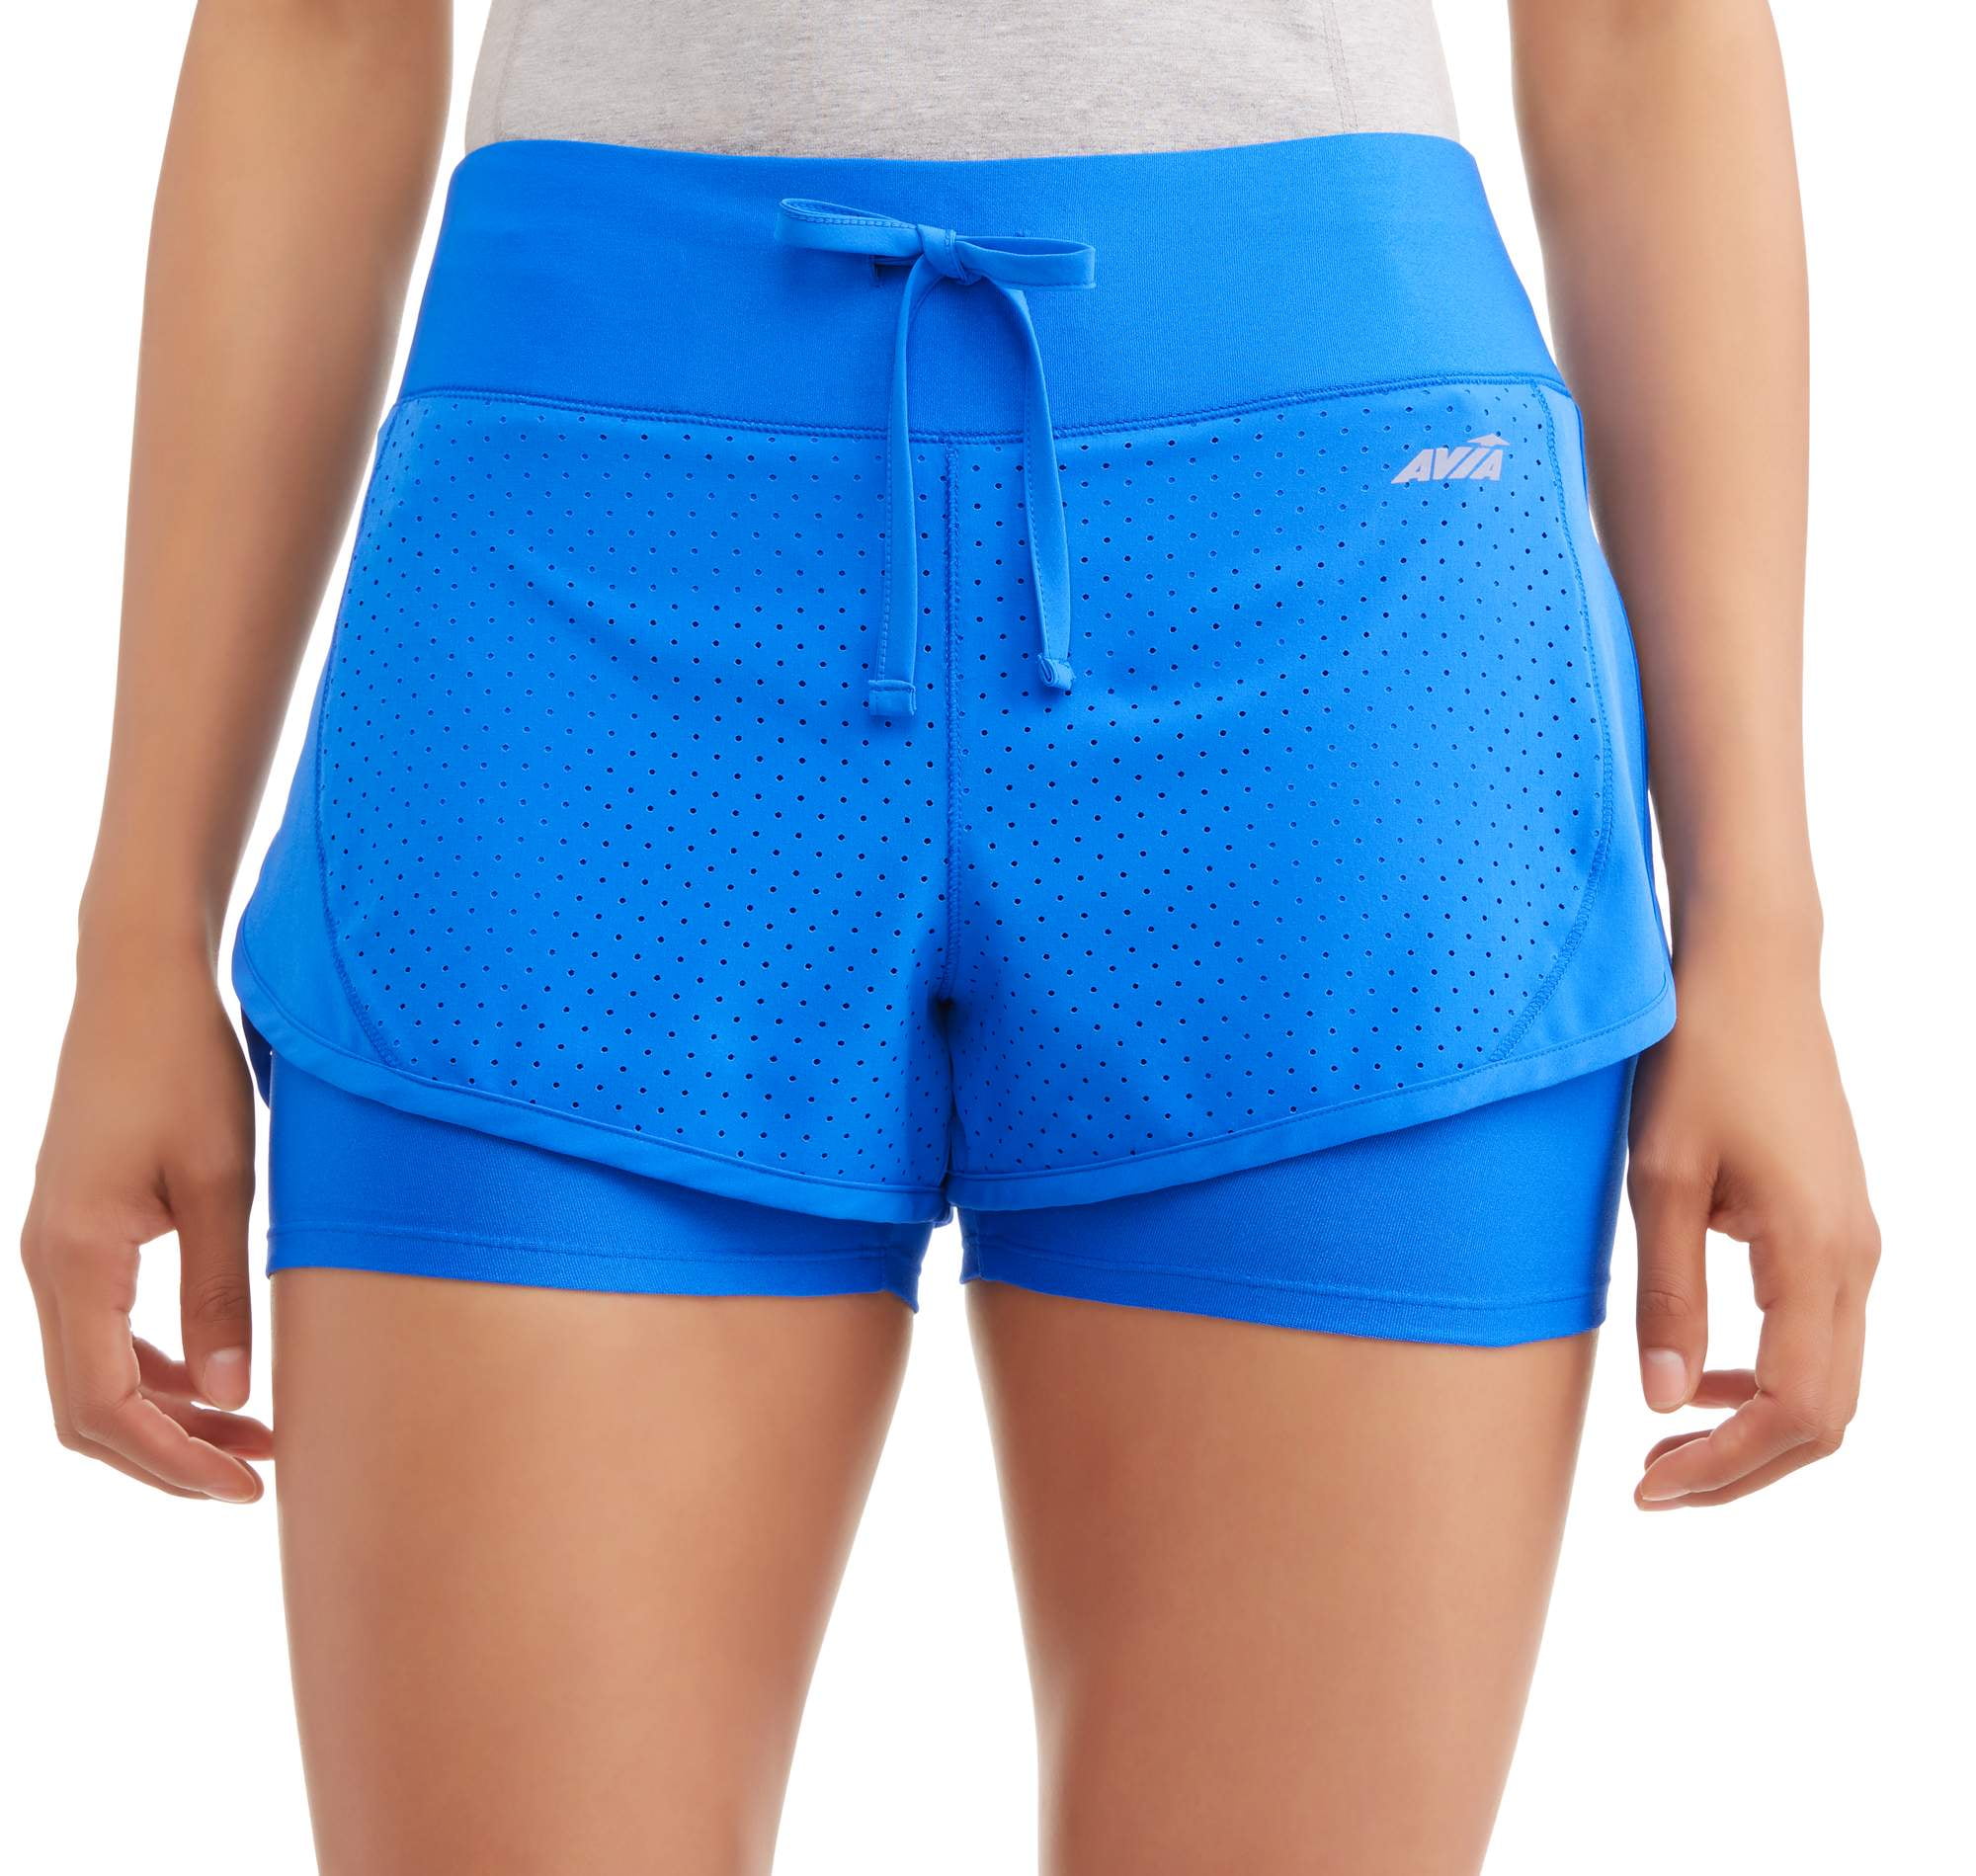 women-s-active-perforated-running-shorts-with-built-in-compression-shorts-walmart